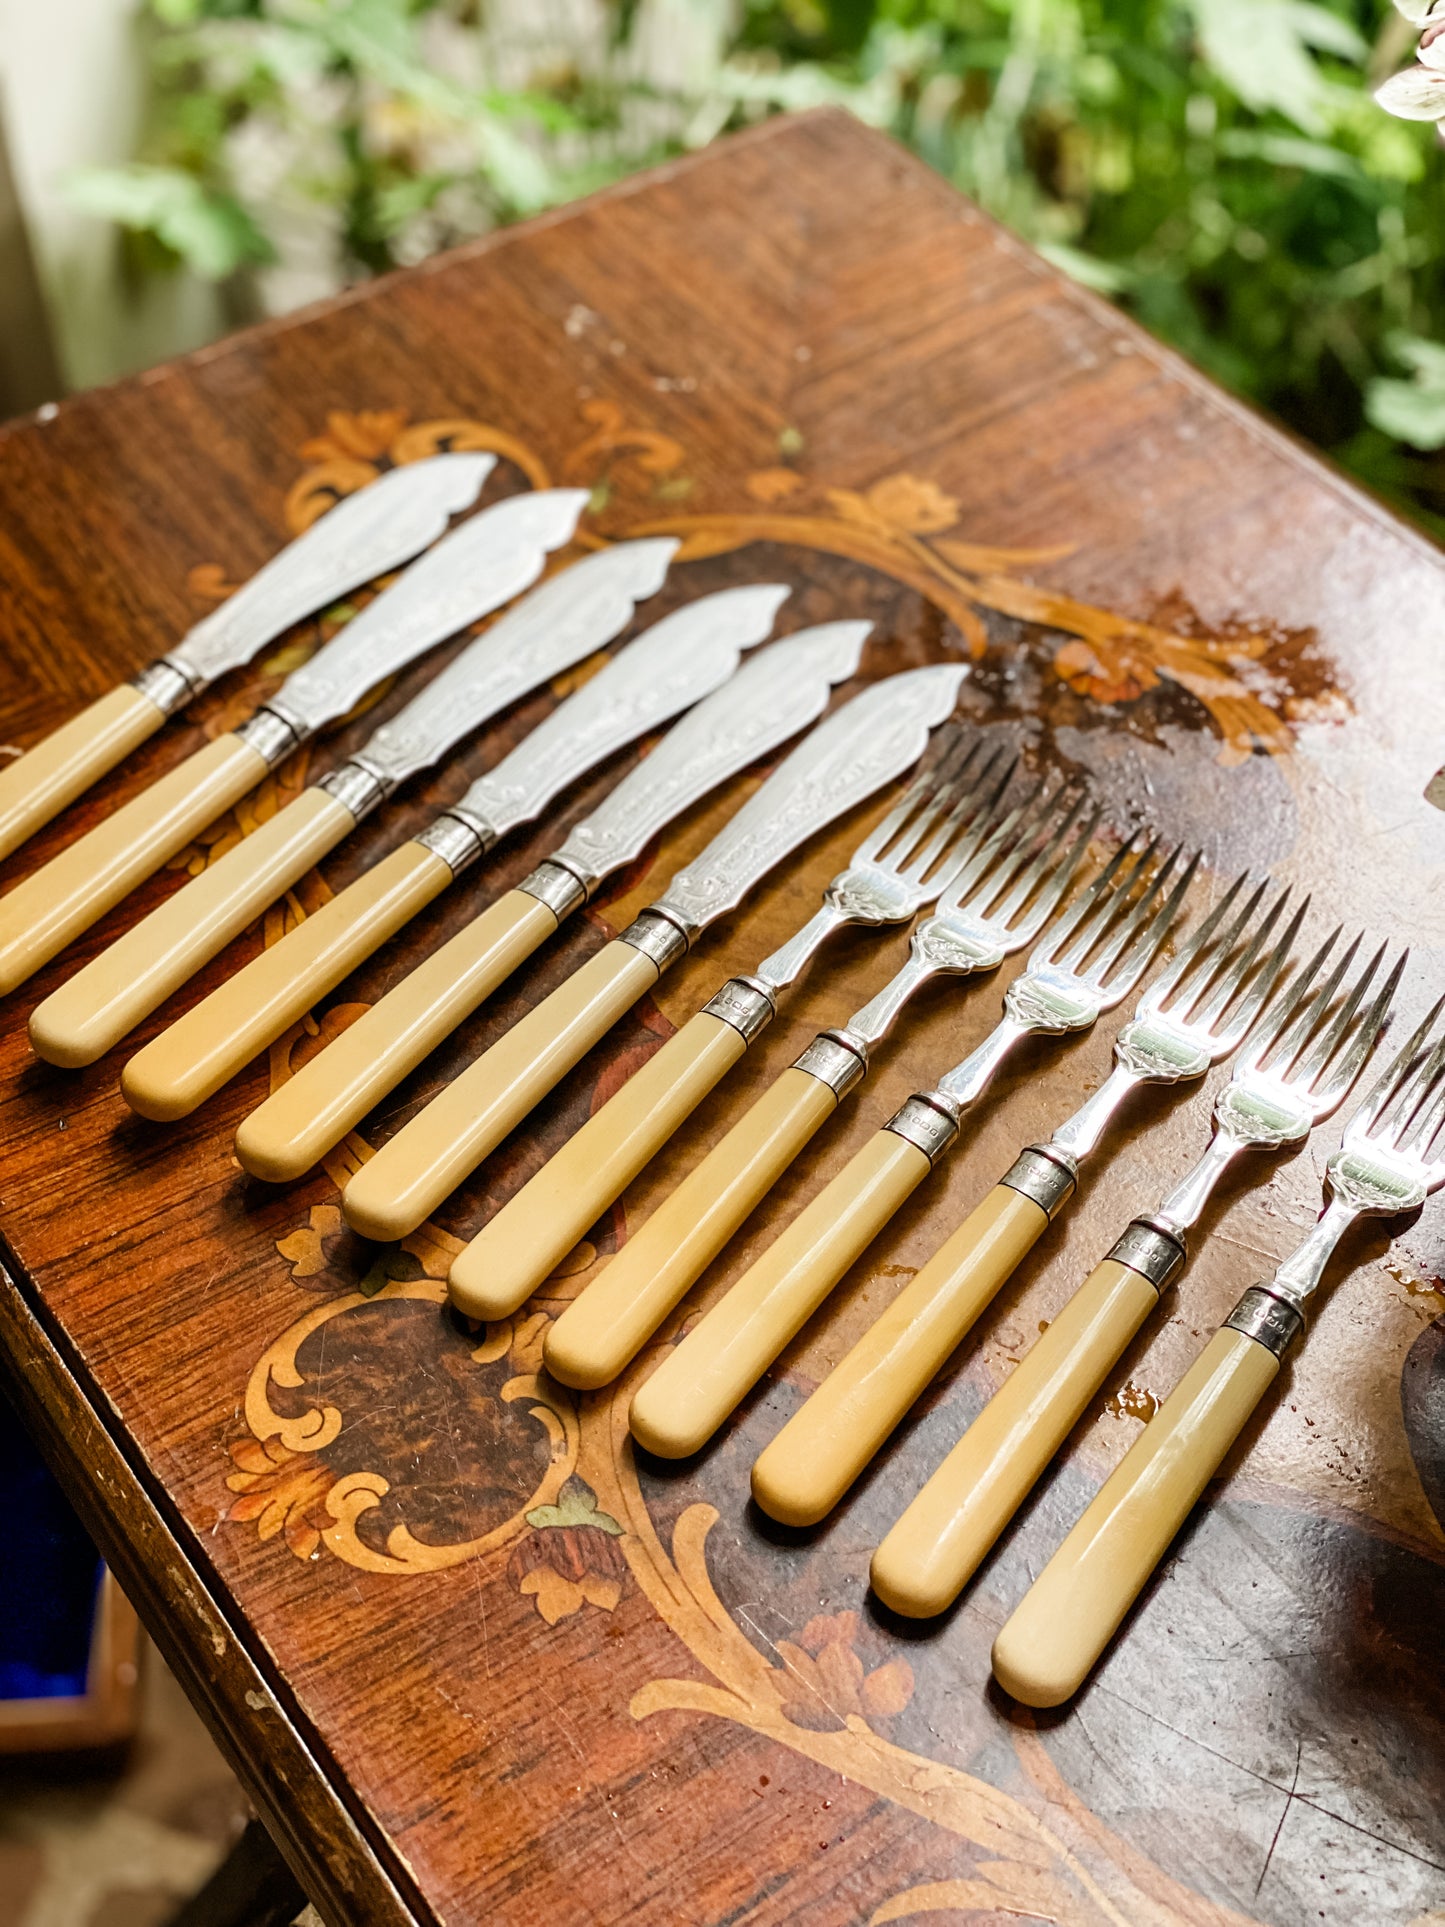 Engraved Antique English Flatware with Service for Six